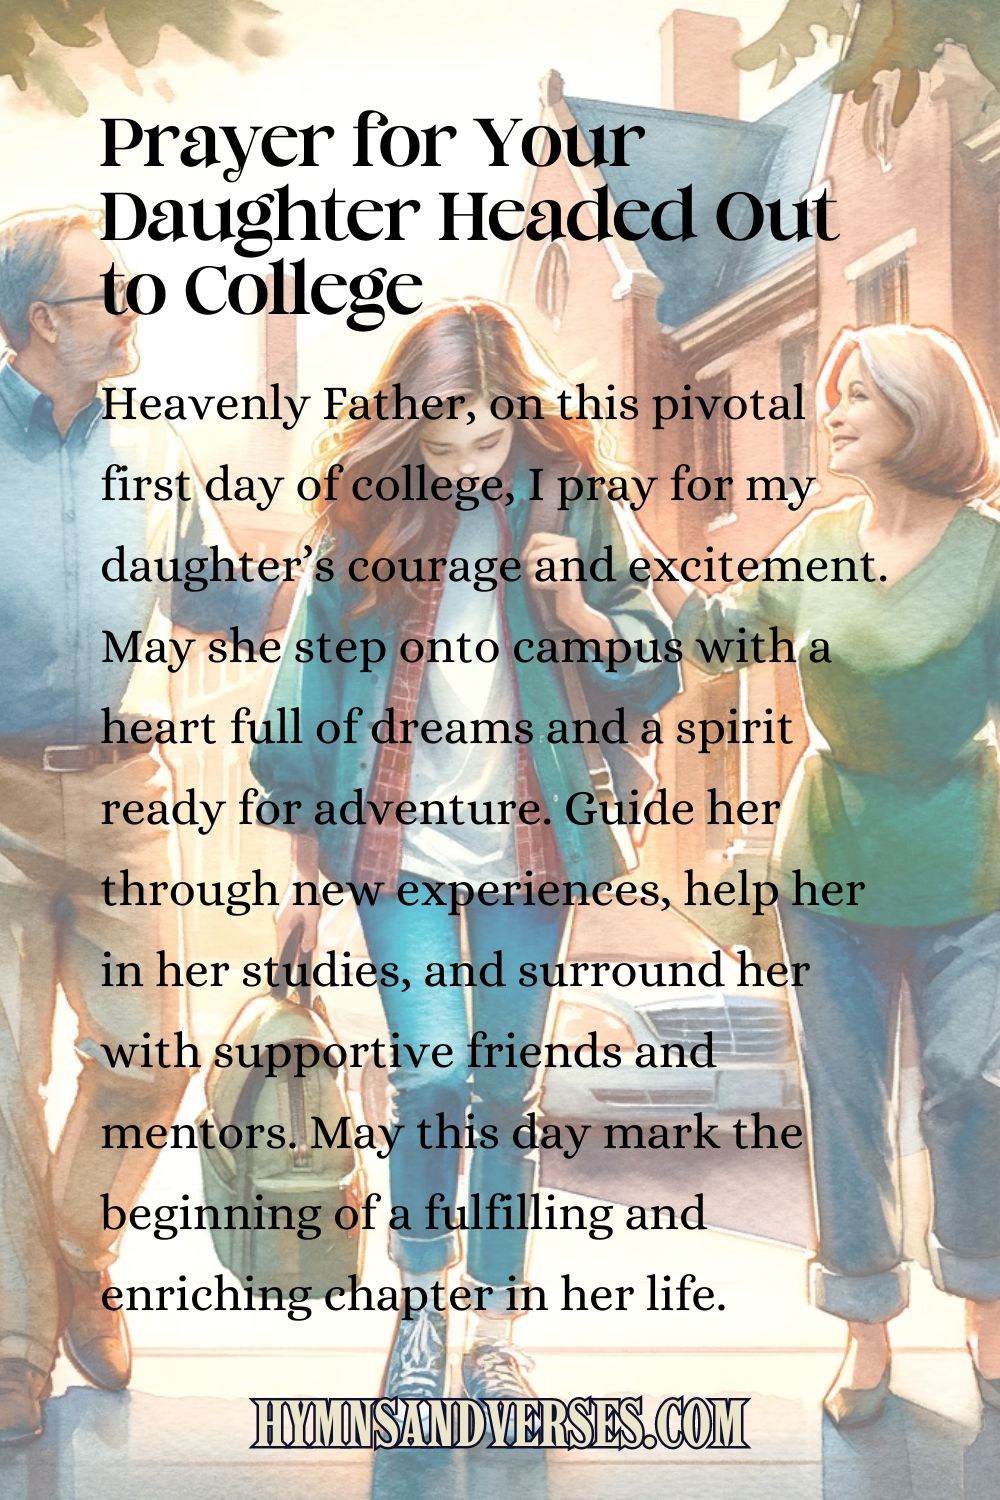 Pin image for Prayer for Your Daughter Headed Out to College, reads: Heavenly Father, on this pivotal first day of college, I pray for my daughter’s courage and excitement. May she step onto campus with a heart full of dreams and a spirit ready for adventure. Guide her through new experiences, help her in her studies, and surround her with supportive friends and mentors. May this day mark the beginning of a fulfilling and enriching chapter in her life.